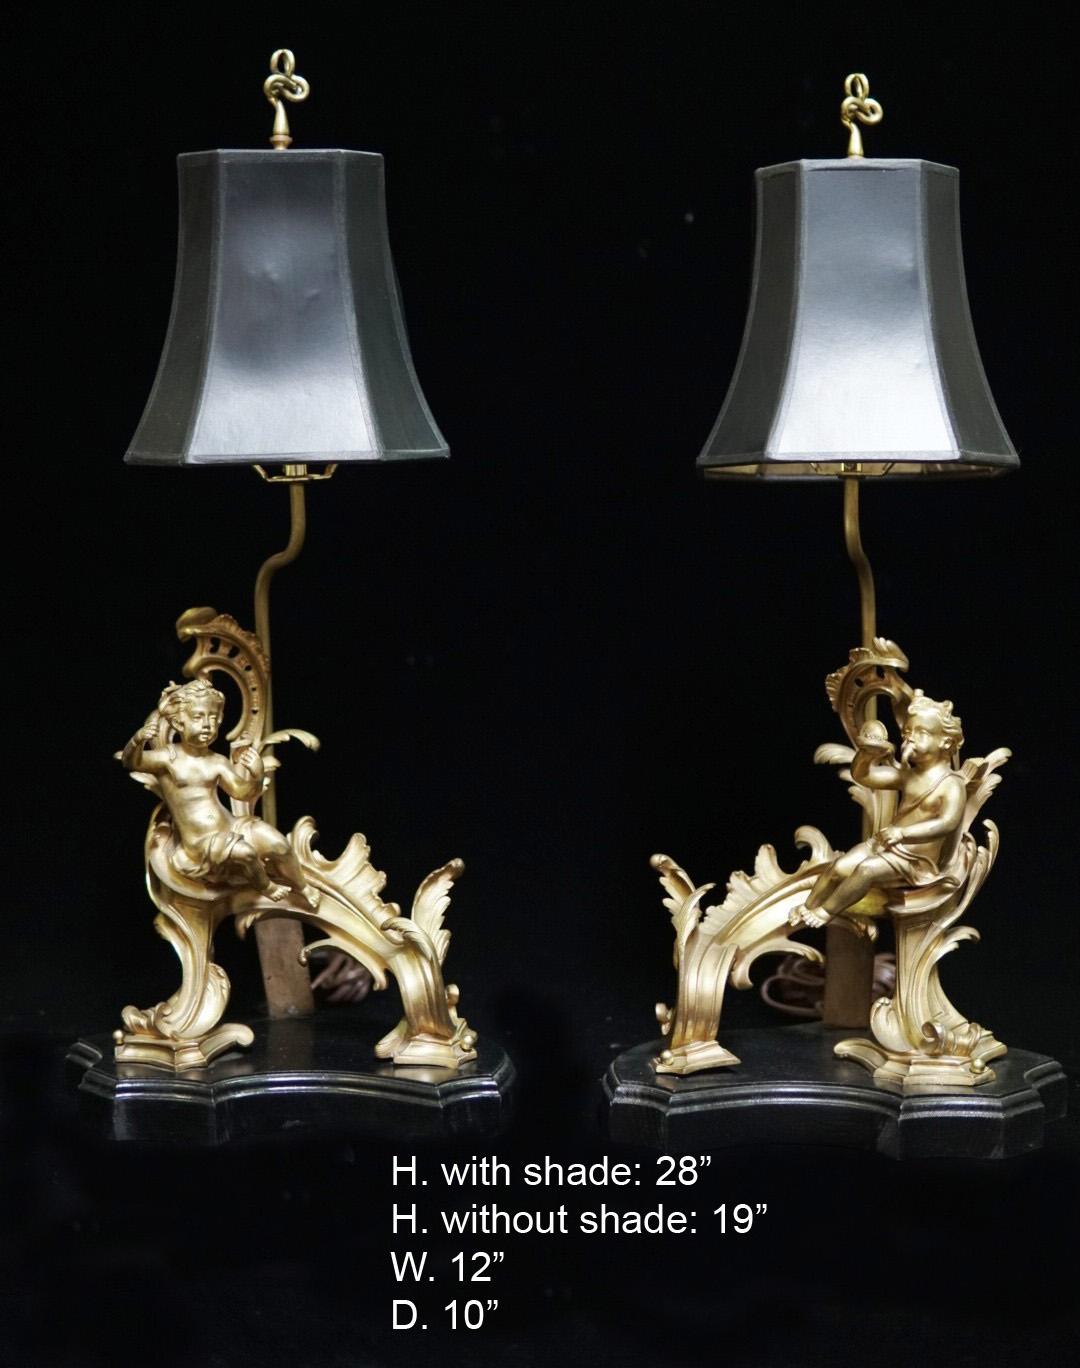 Pair of French ormolu chenet mounted lamps with black rectangular shades,
Late 19th century.
Each lamp is mounted with a ormolu acanthus motif chenet with a putti, raised on a conforming stepped black base. 
Shades not